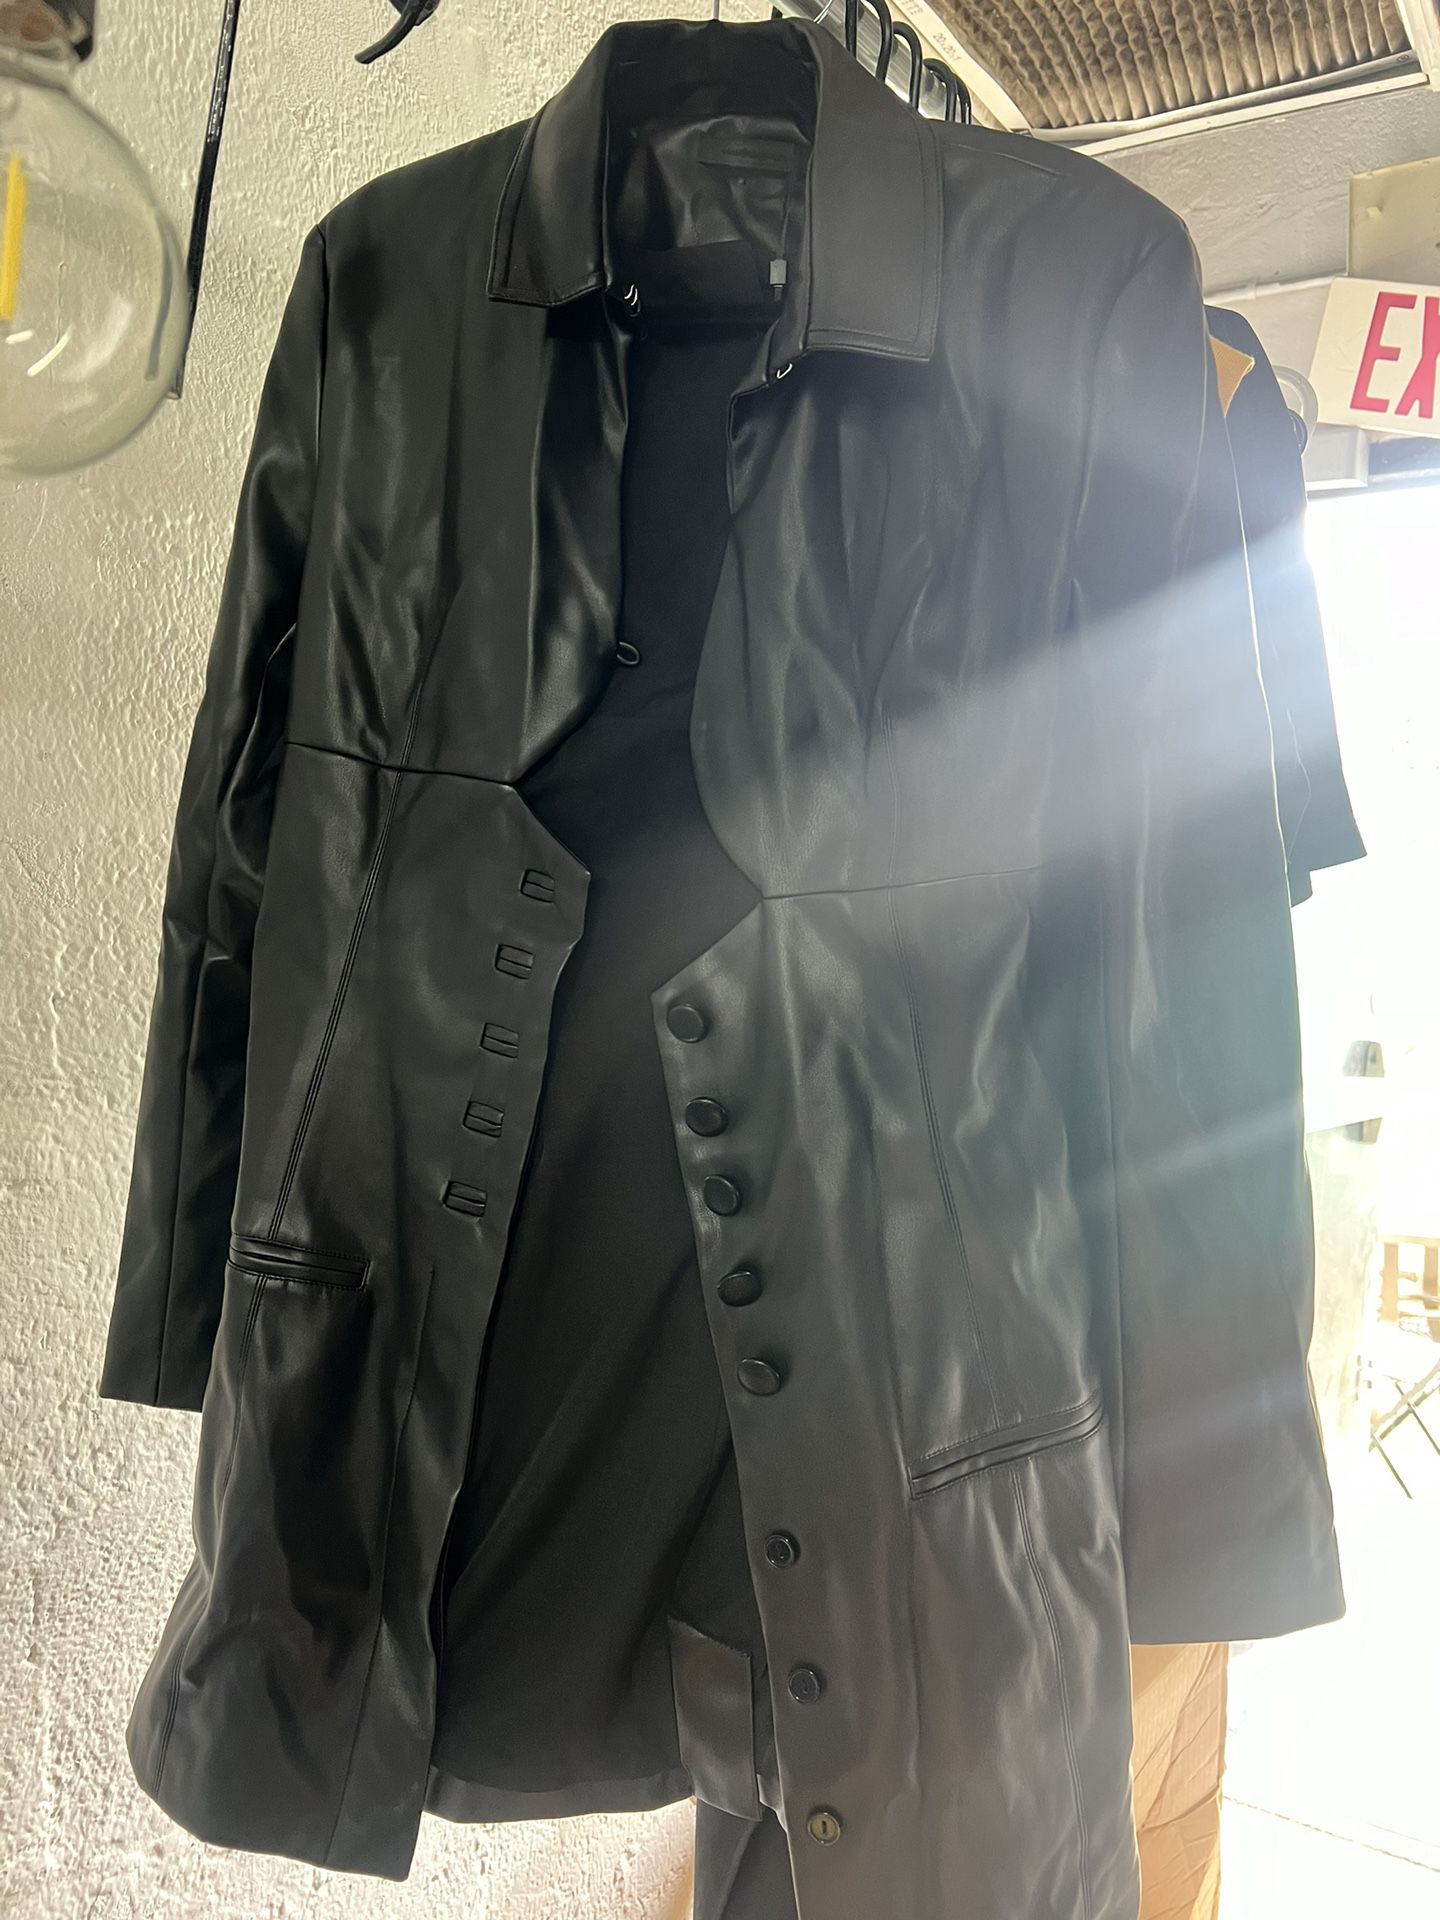 Brand New Leather Jacket Or Dress In Size XL Euro